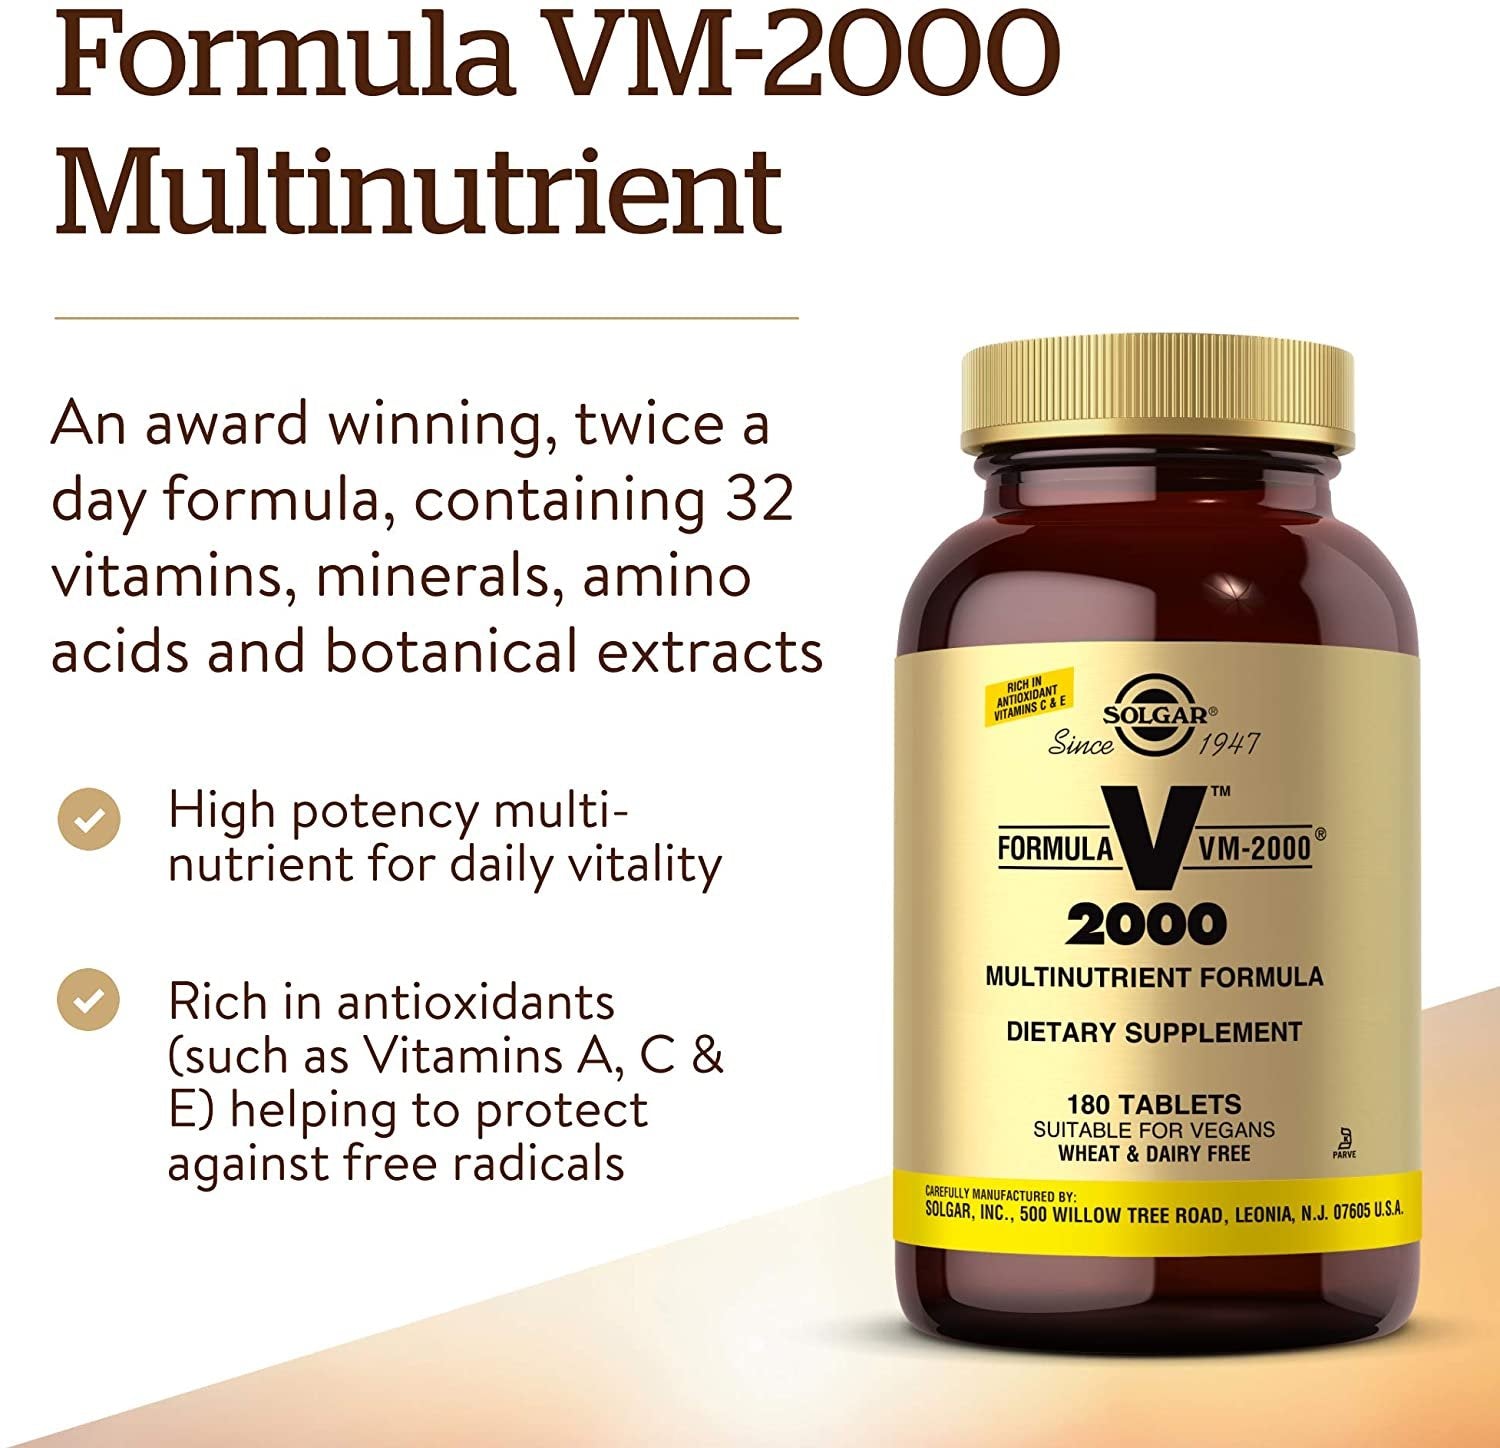 Solgar Formula VM-2000 (Multinutrient System), 180 Tablets - Premium Quality Multiple - Contains Zinc - Supports A Healthy Immune System - Vegan, Dairy Free, Kosher - 90 Servings